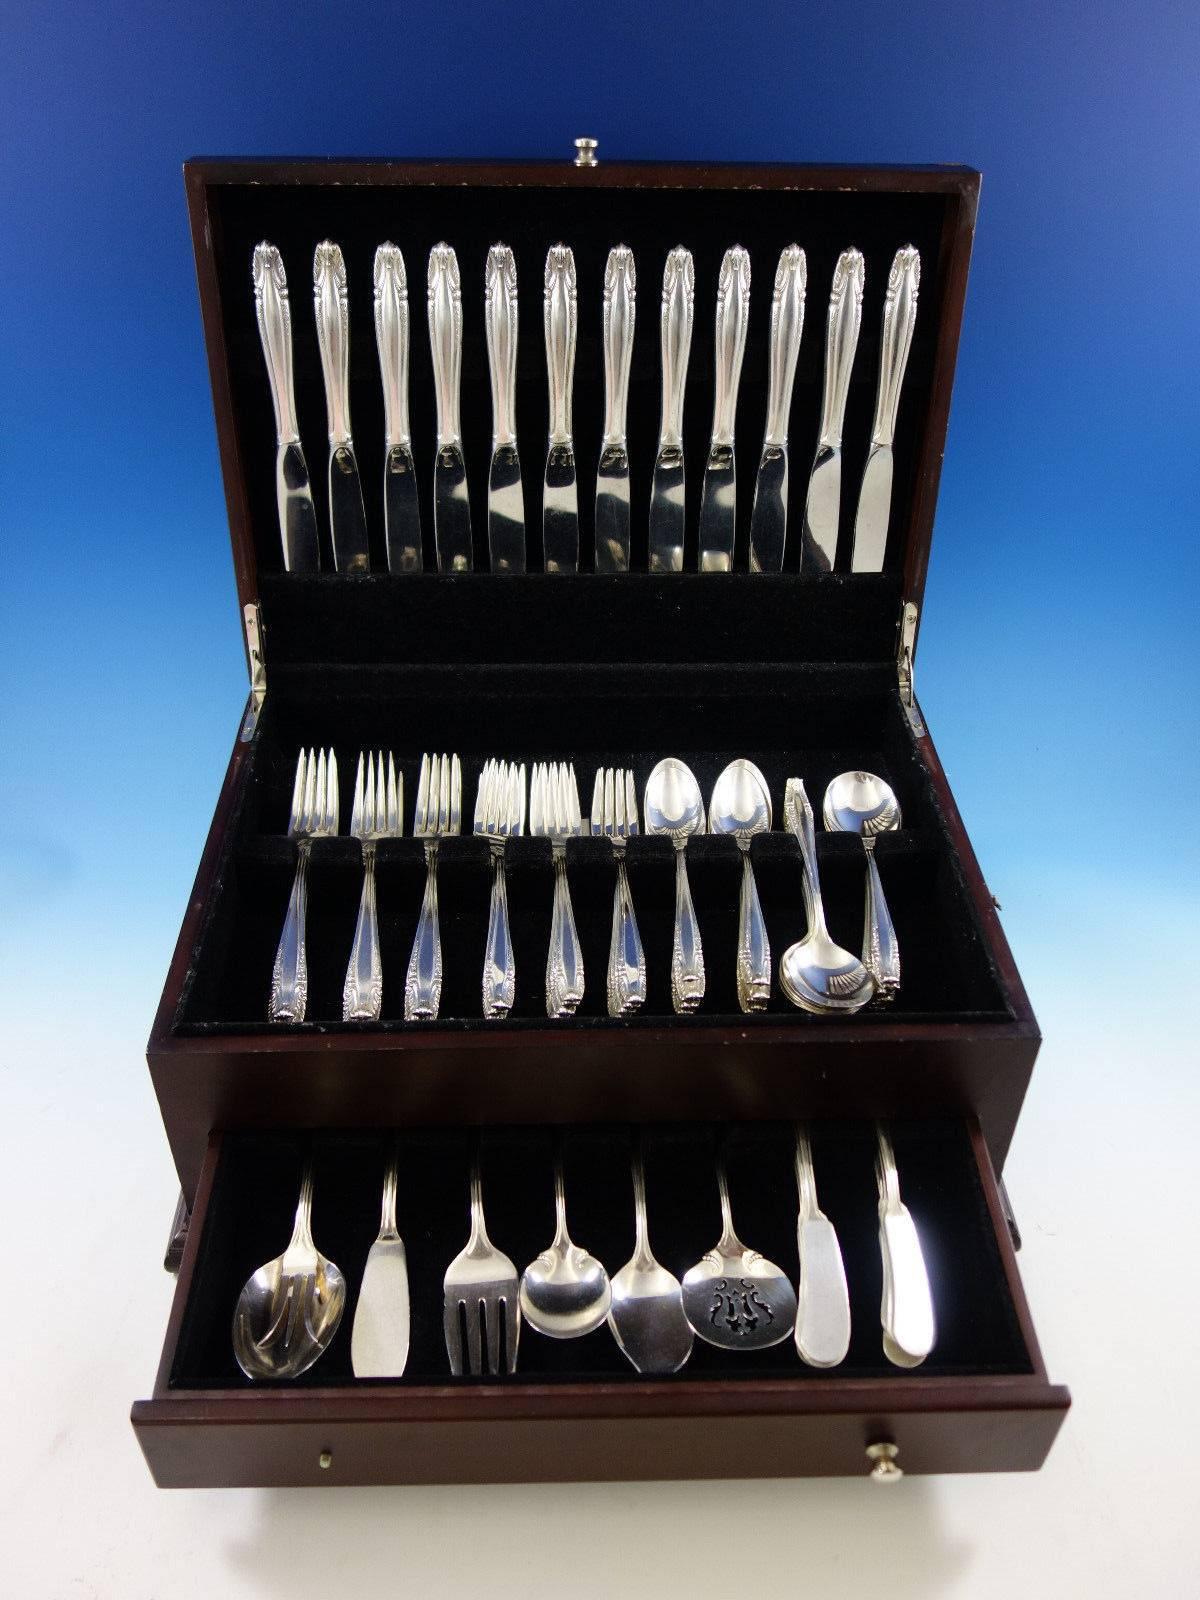 Stradivari by Wallace sterling silver flatware set - 78 pieces. This set includes: 

12 knives, 8 3/4